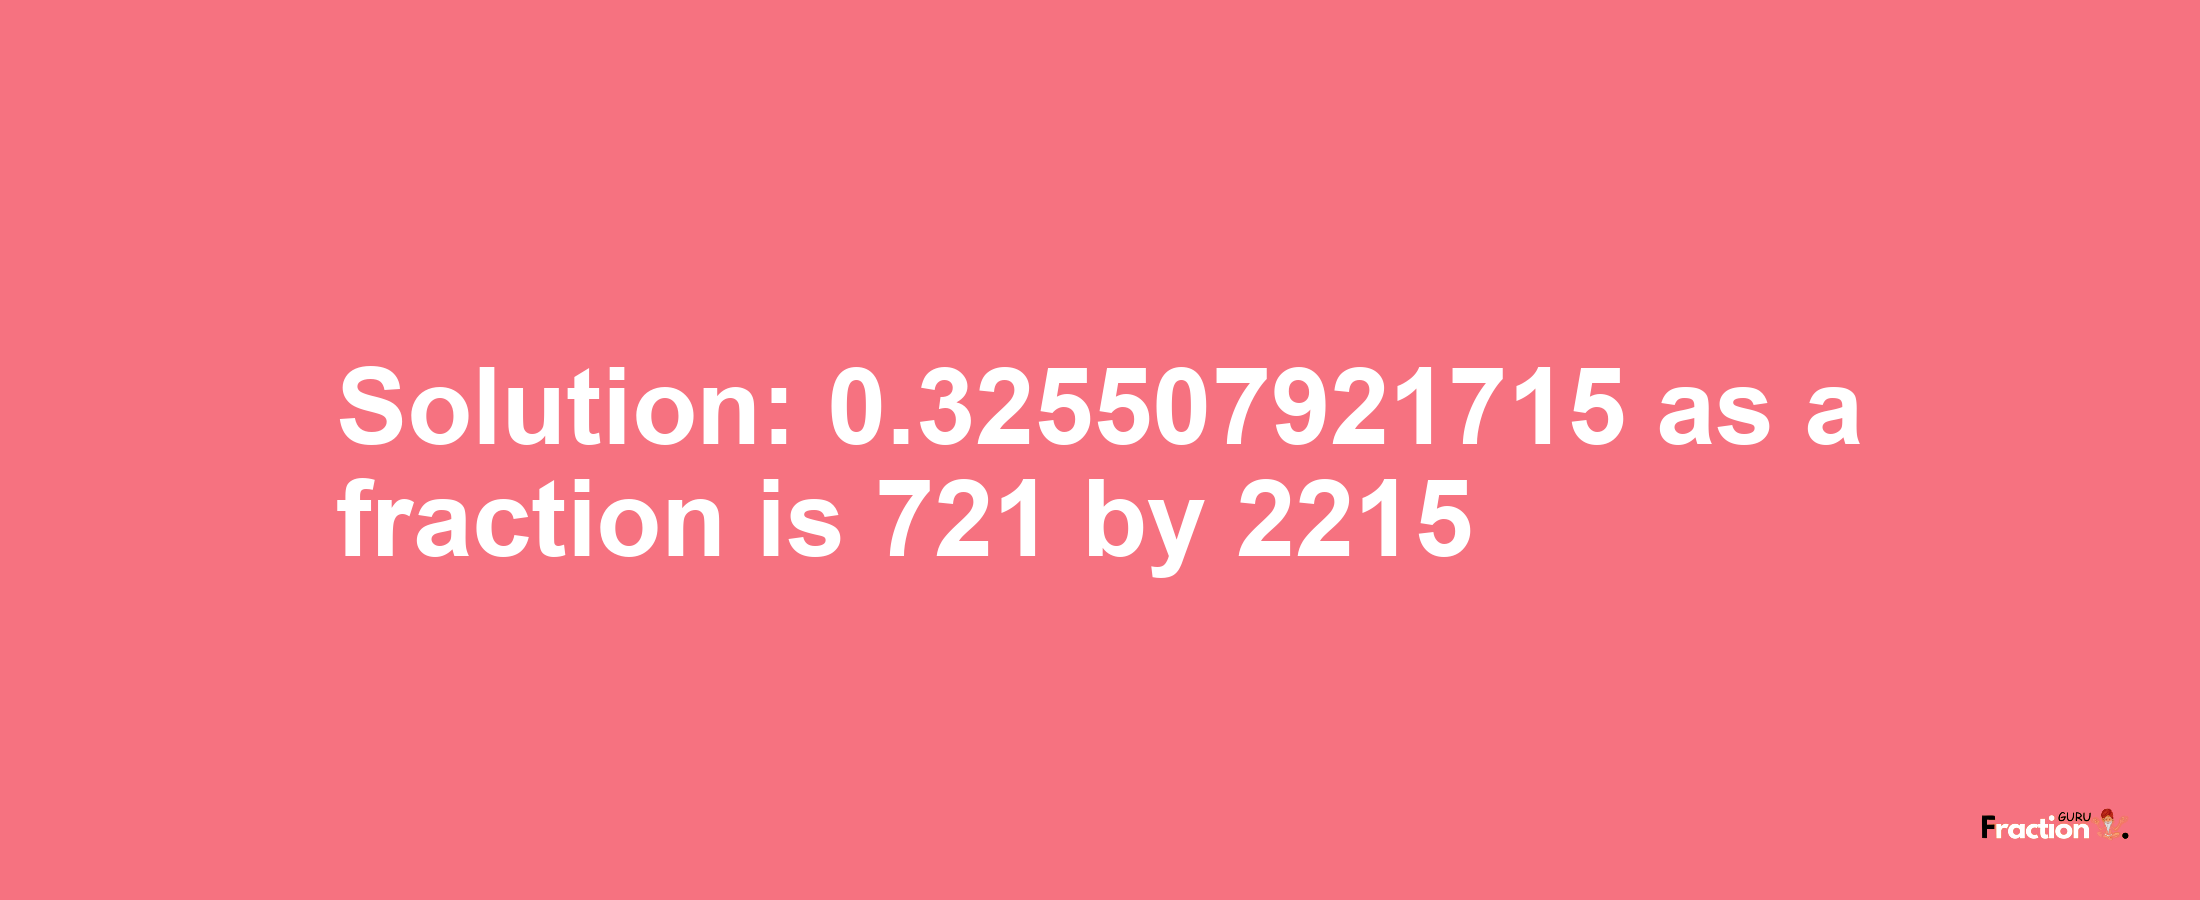 Solution:0.325507921715 as a fraction is 721/2215